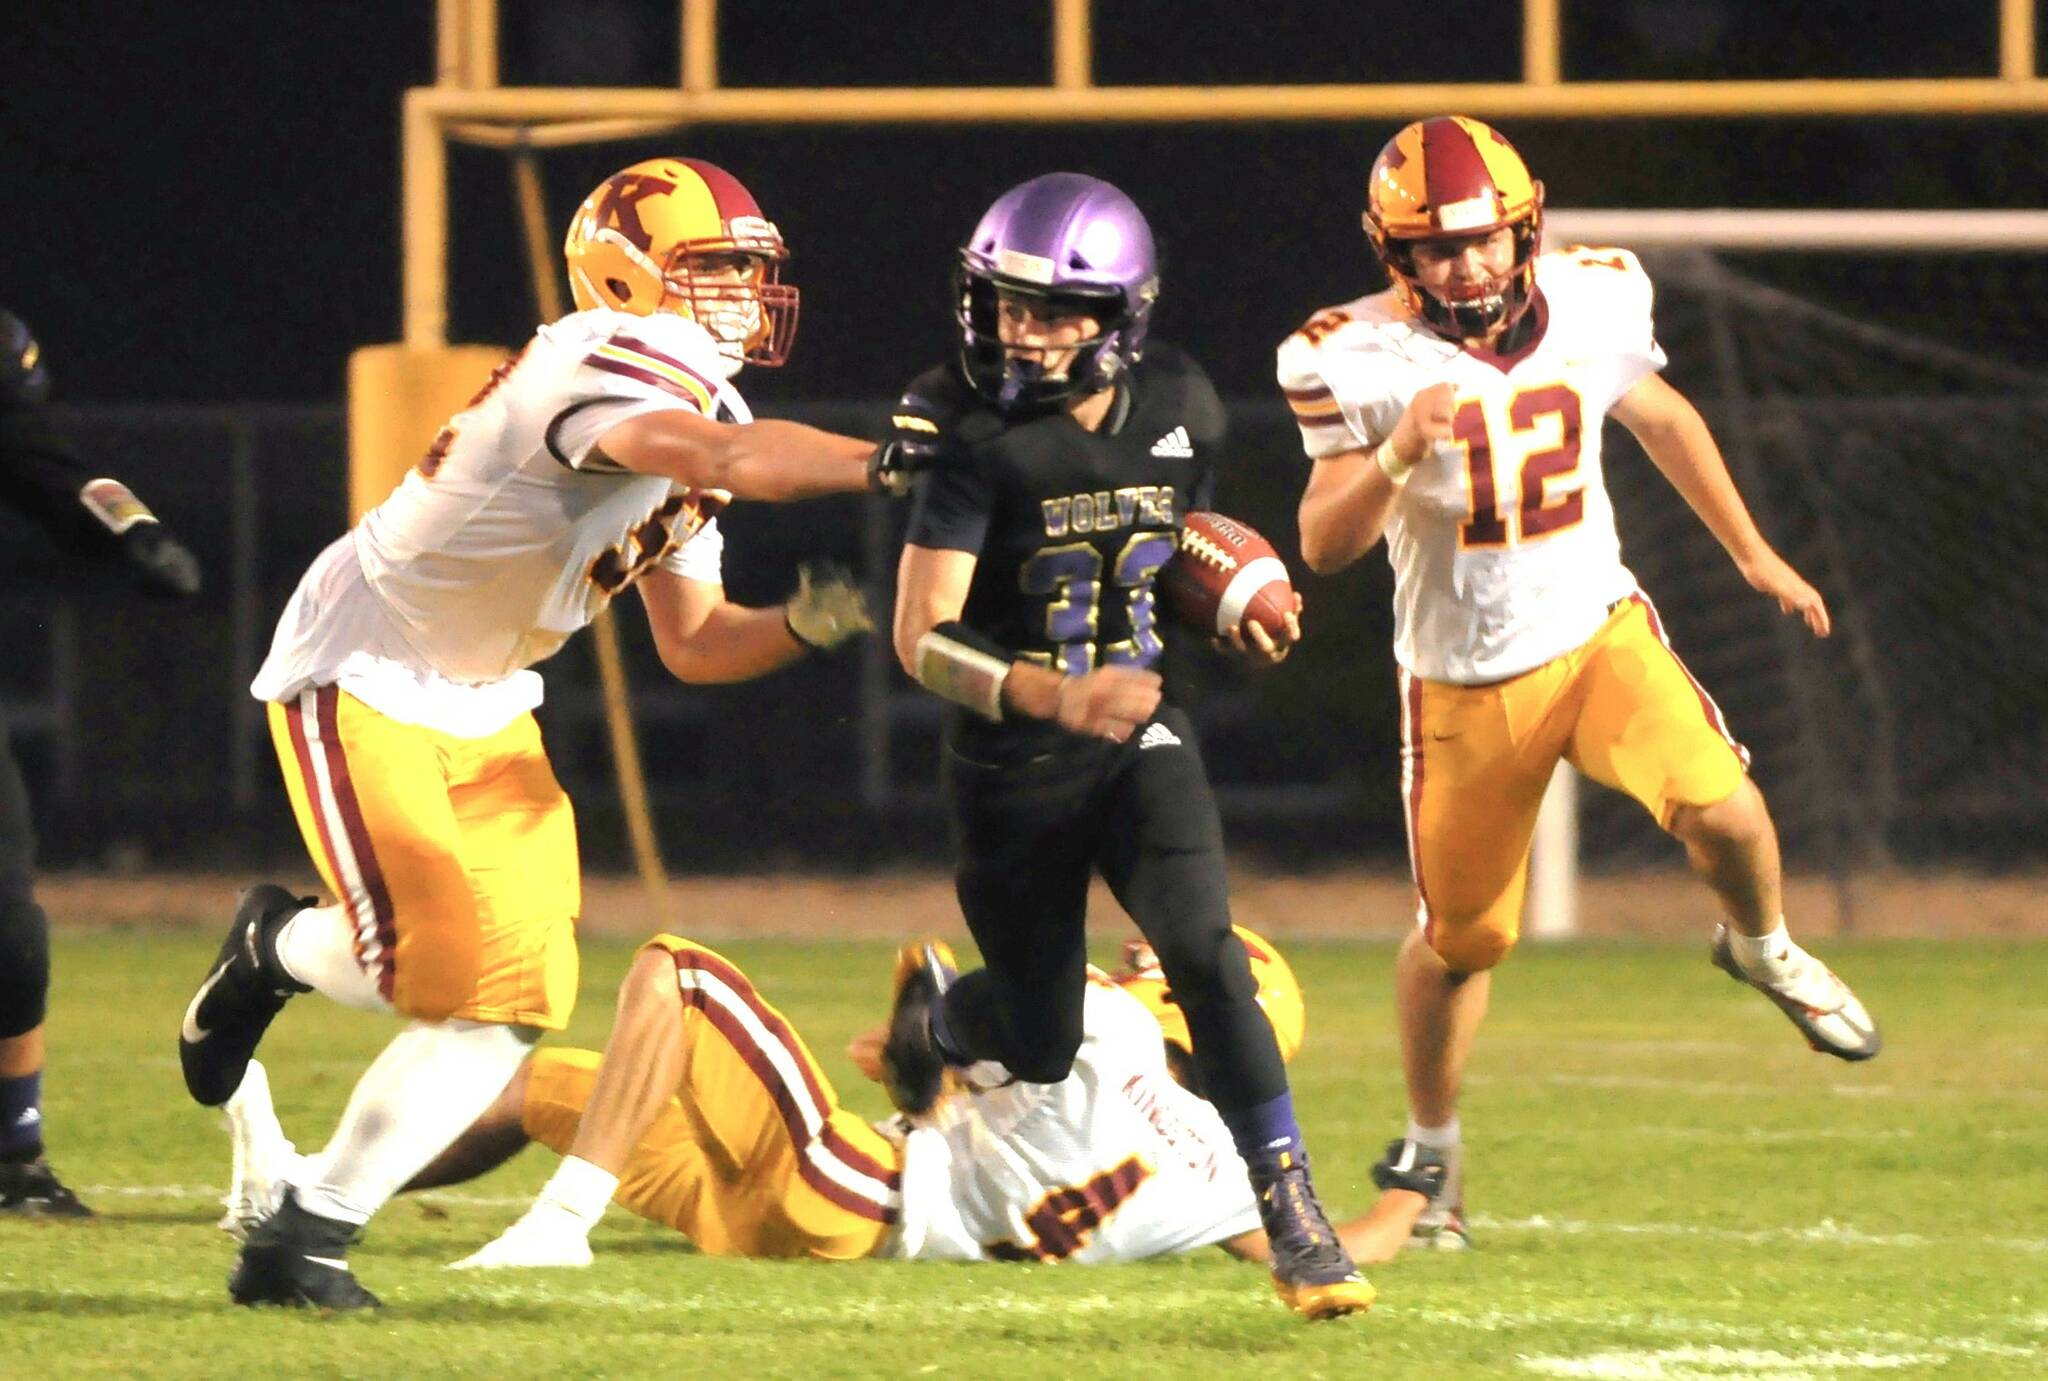 Sequim's Sam Fitzgerald runs the ball during the Wolves' 27-14 win over Kingston on Friday night. (Michael Dashiell/Olympic Peninsula News Group)